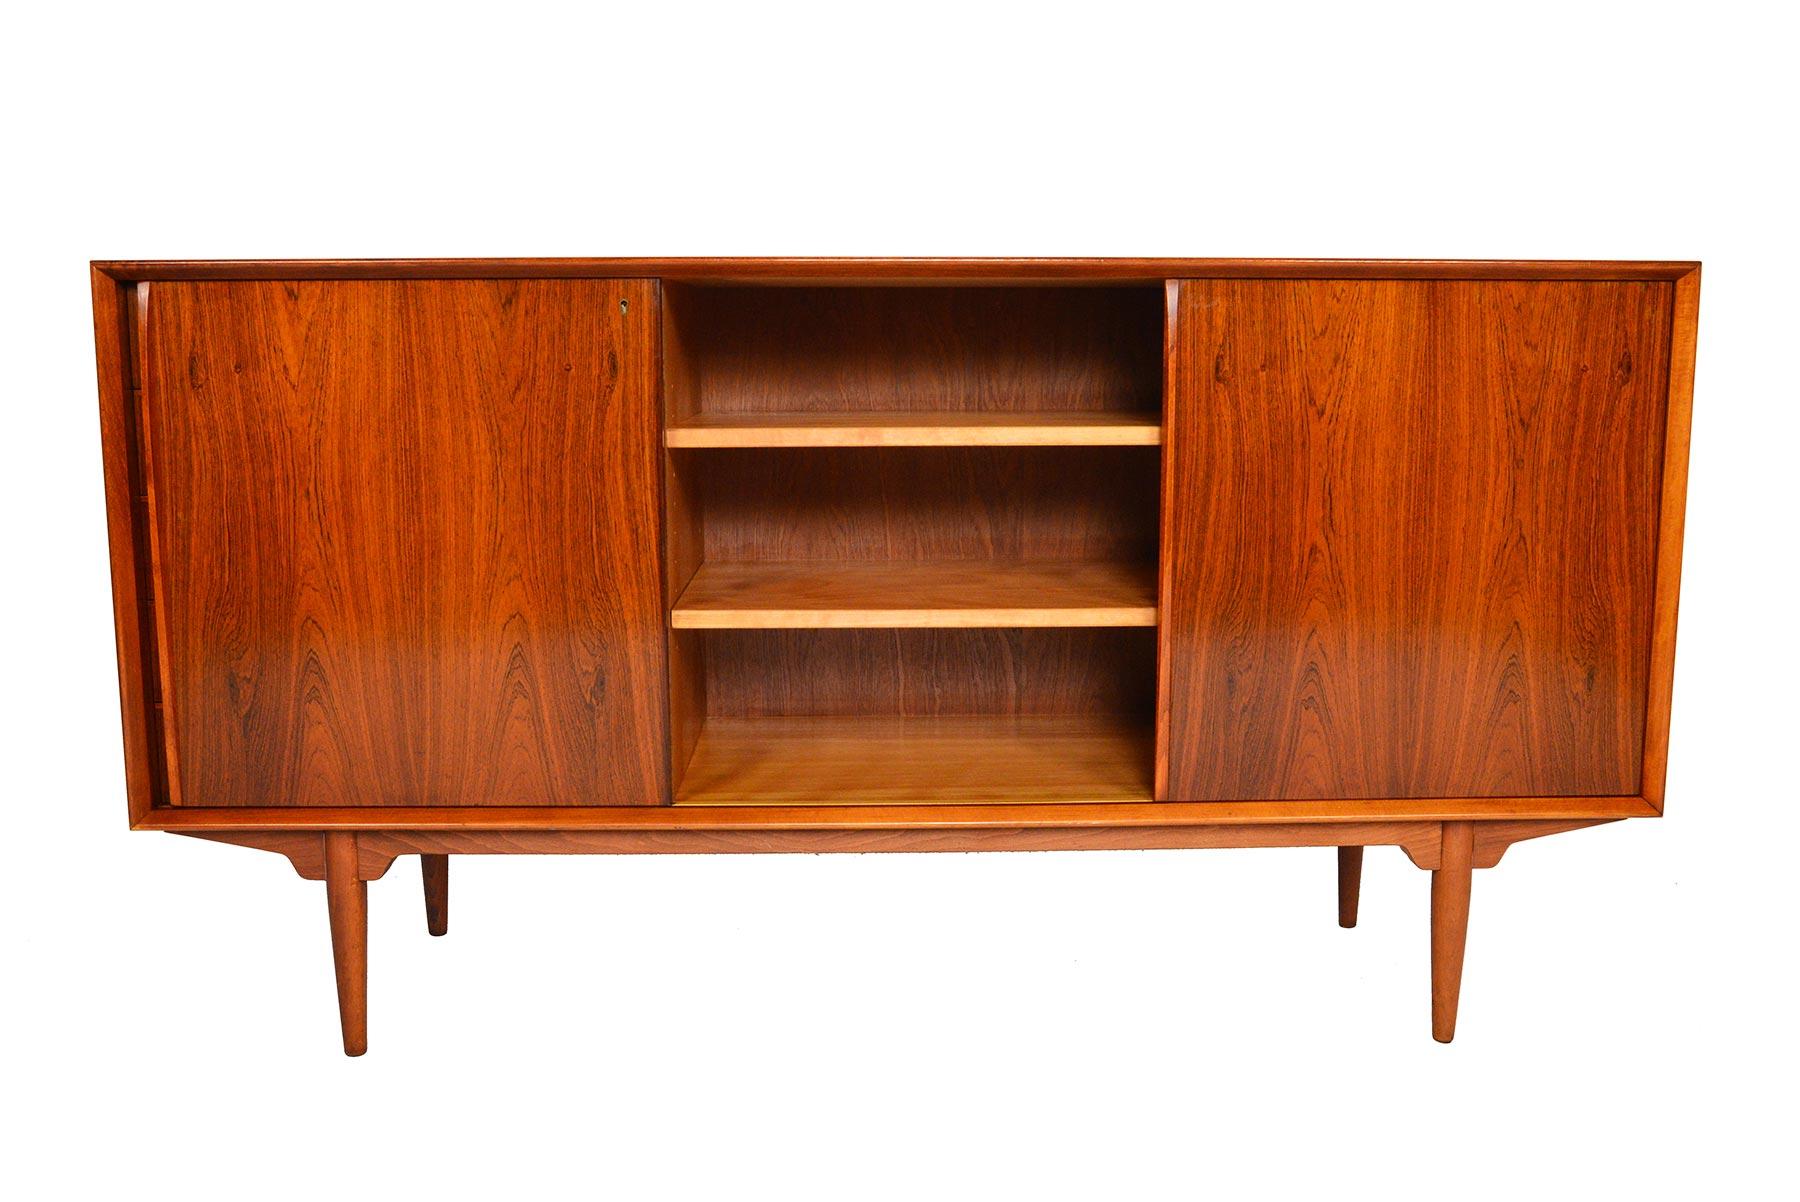 This Swedish modern 'Silva' model midcentury rosewood credenza was designed by Svante Skogh in the 1960s. This piece features a unique locking mechanism. When the key is turned to the locking position, the cabinet doors and the drawers are